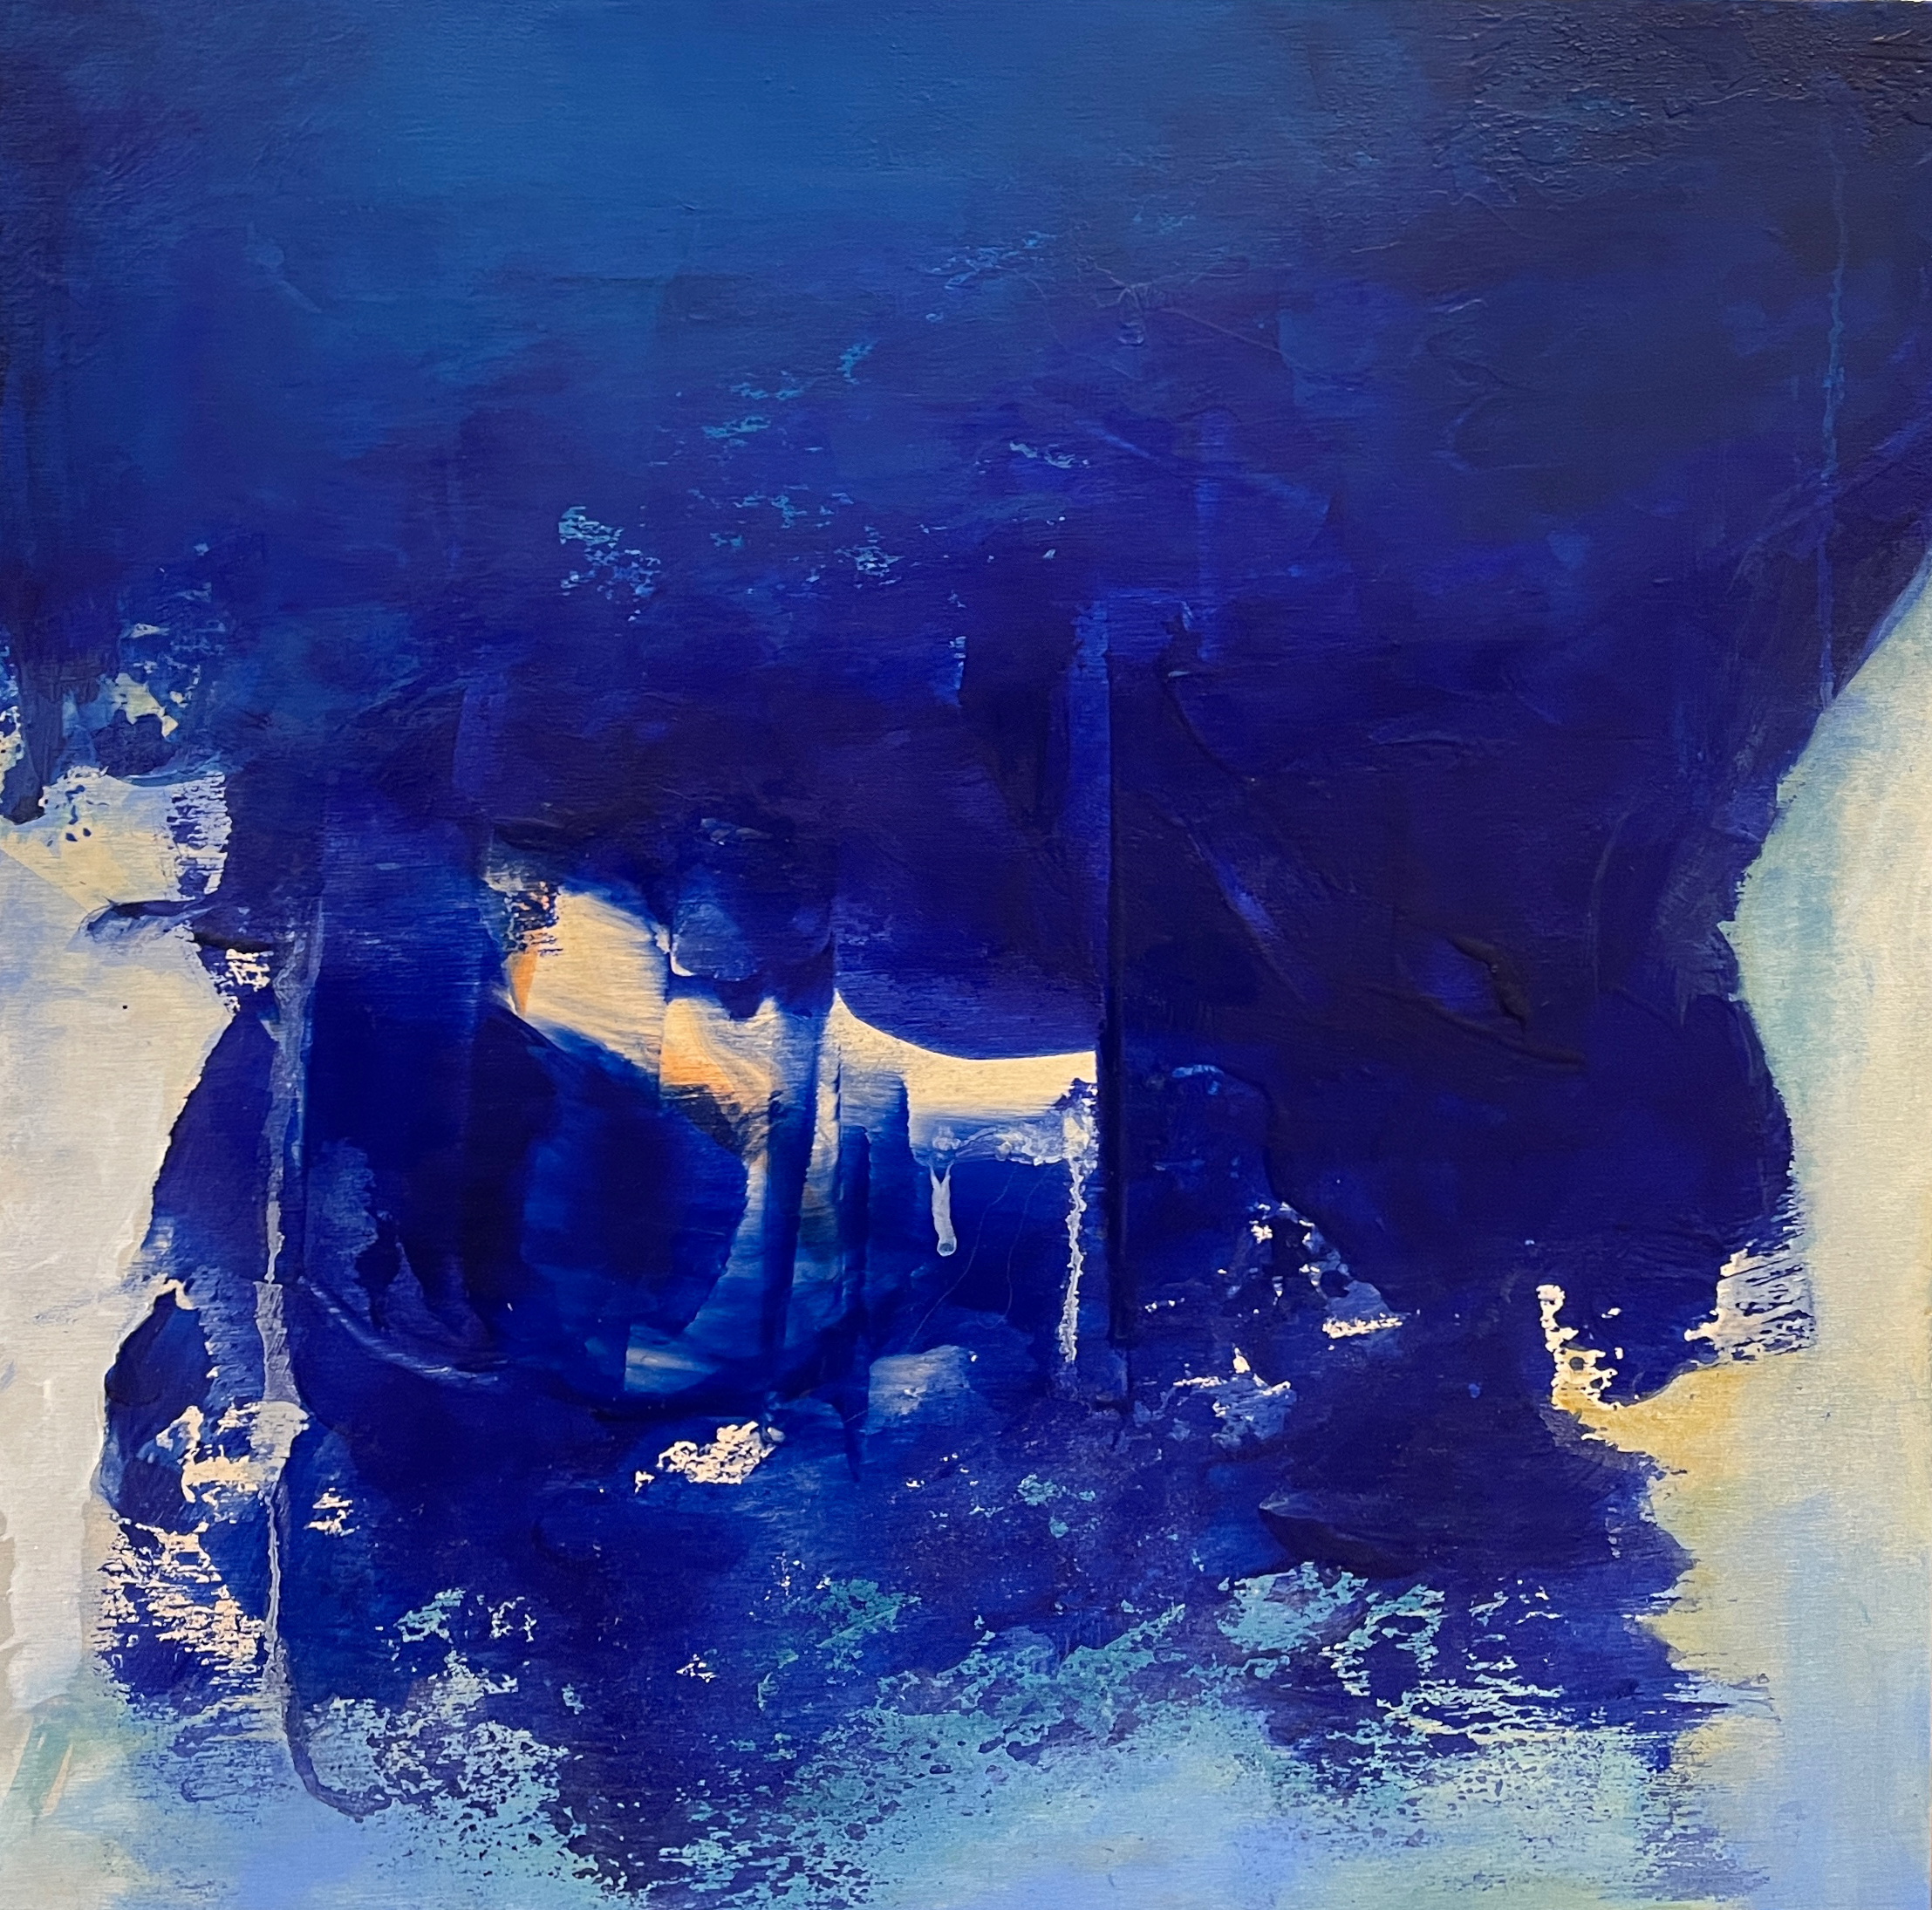 cobalt and ultramarine bue, some pale blue in bottom, abstract forms